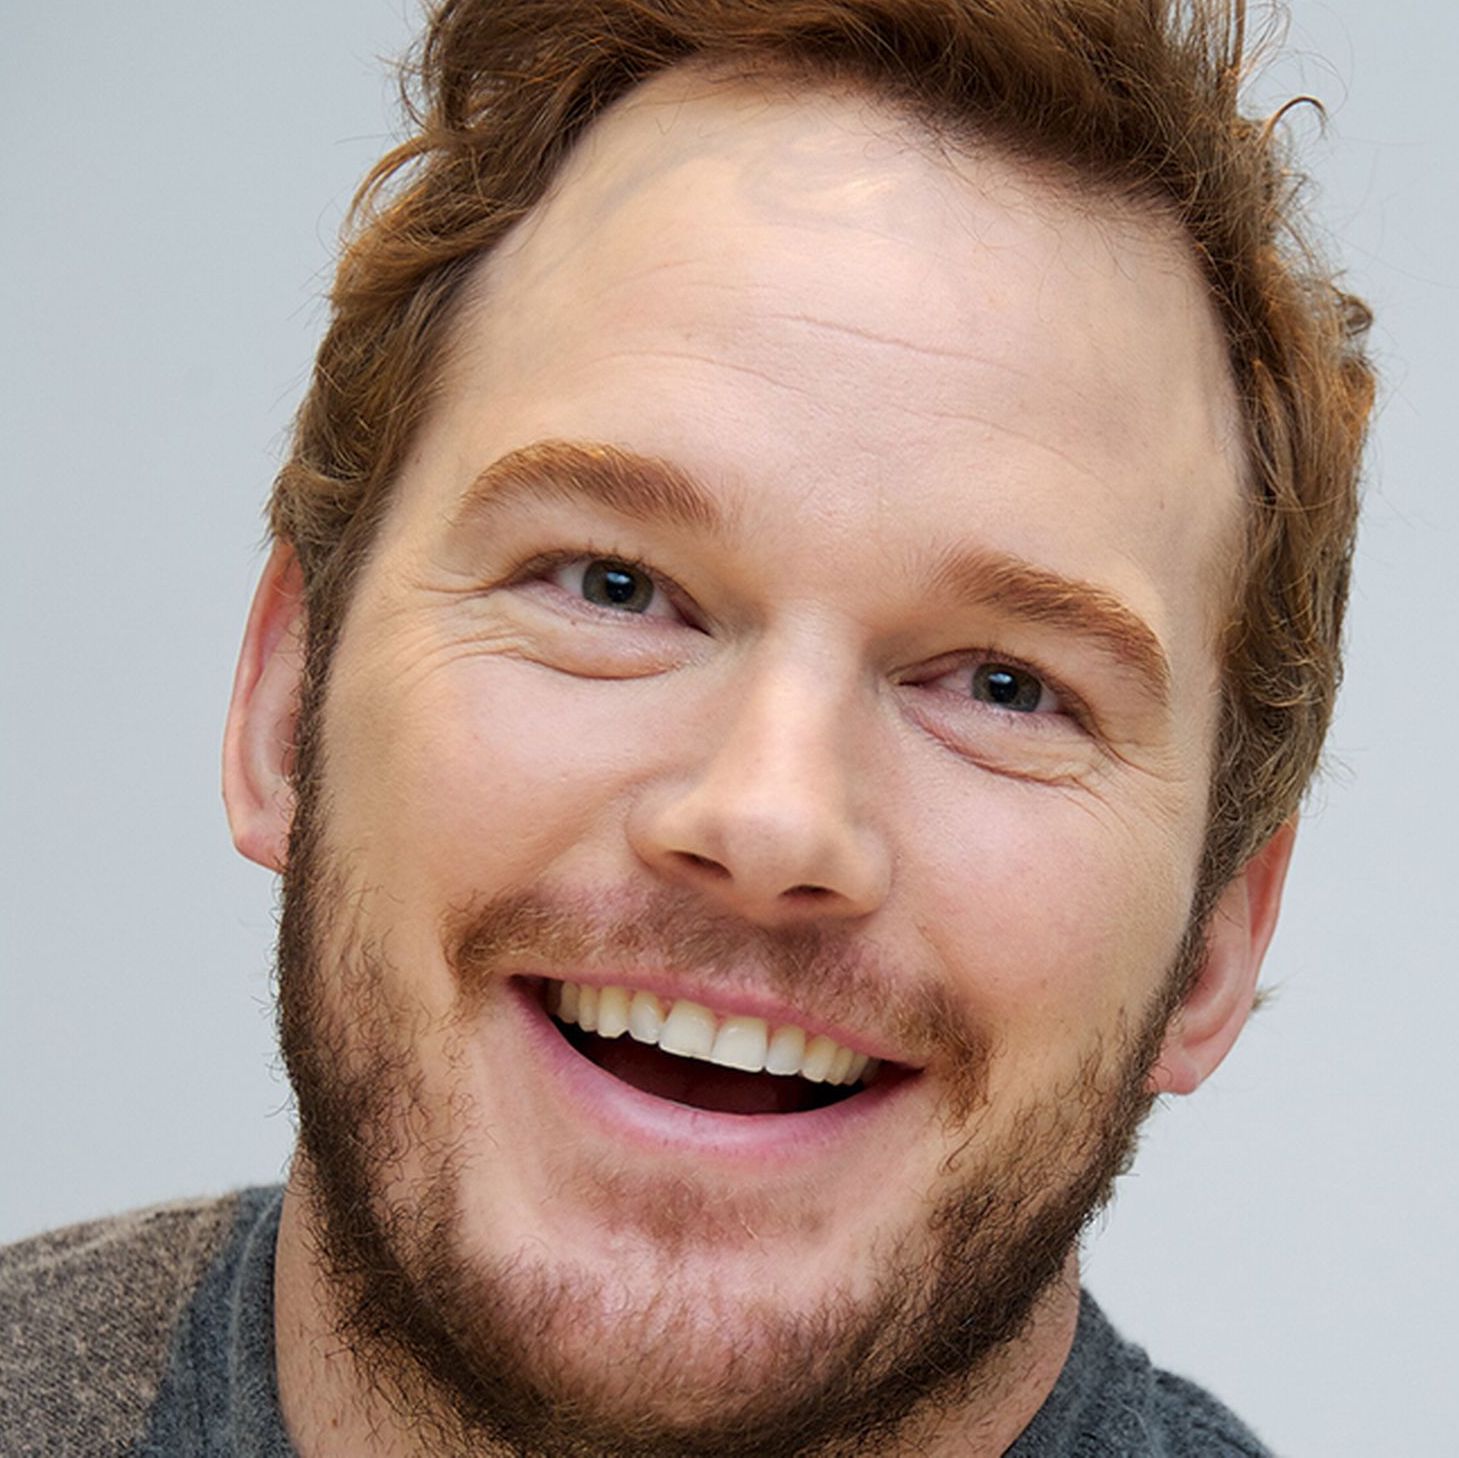 Chris pratt is an american actor best known for films like 'the lego m...